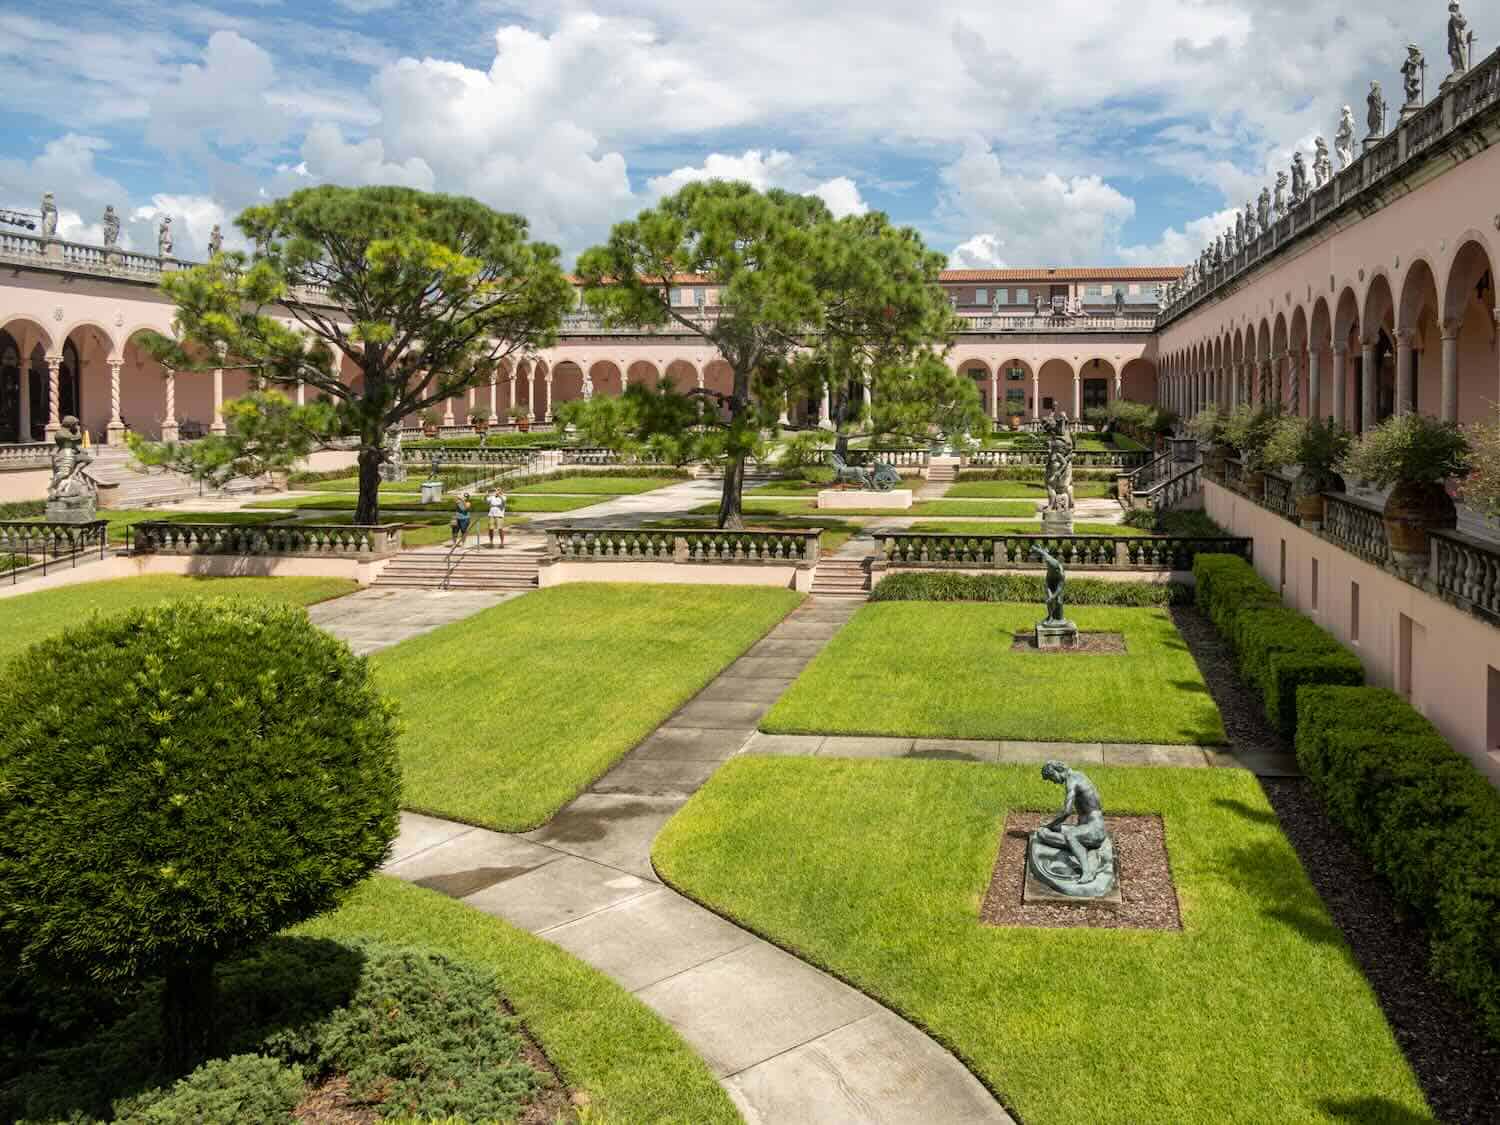 A formal garden at Ringling Museum of Art where patches of grass with sculpture in the center are separated by concrete walkways is one of the many cultural things to do in Sarasota, Florida.